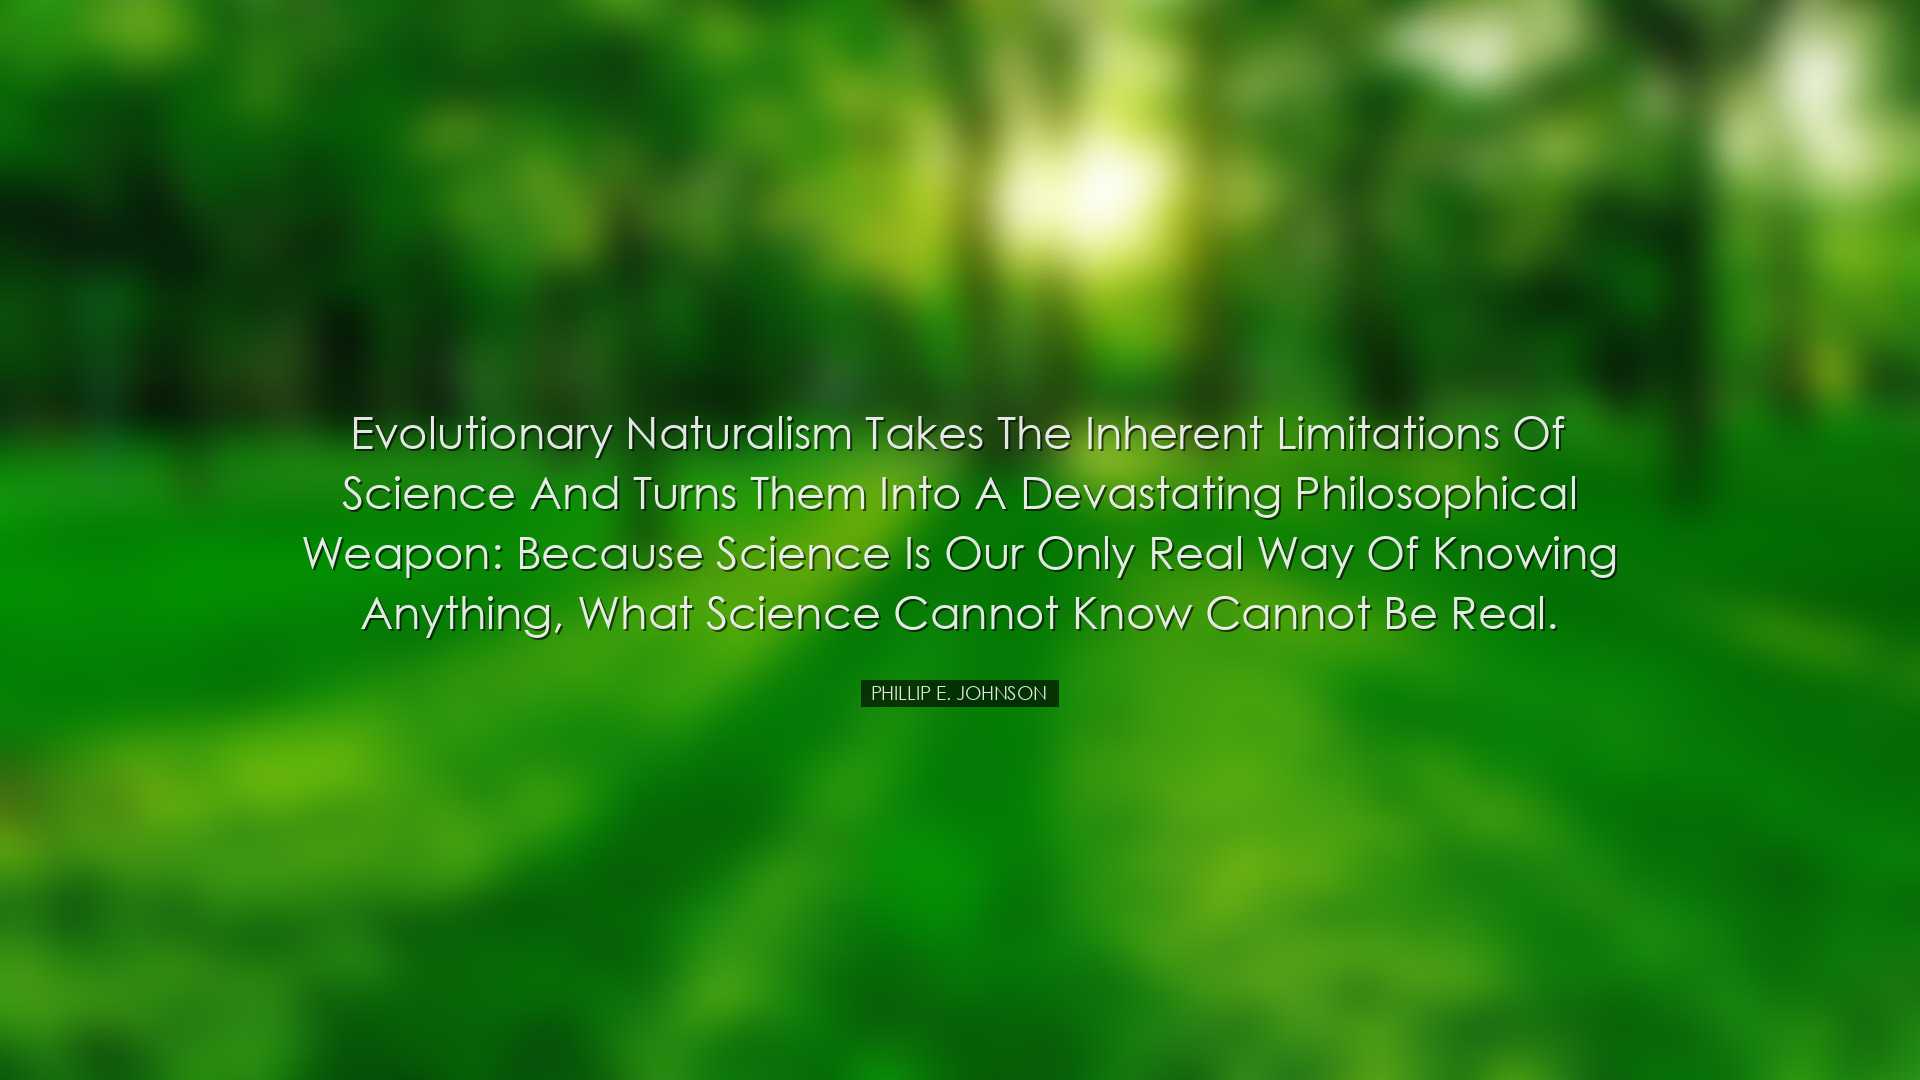 Evolutionary naturalism takes the inherent limitations of science